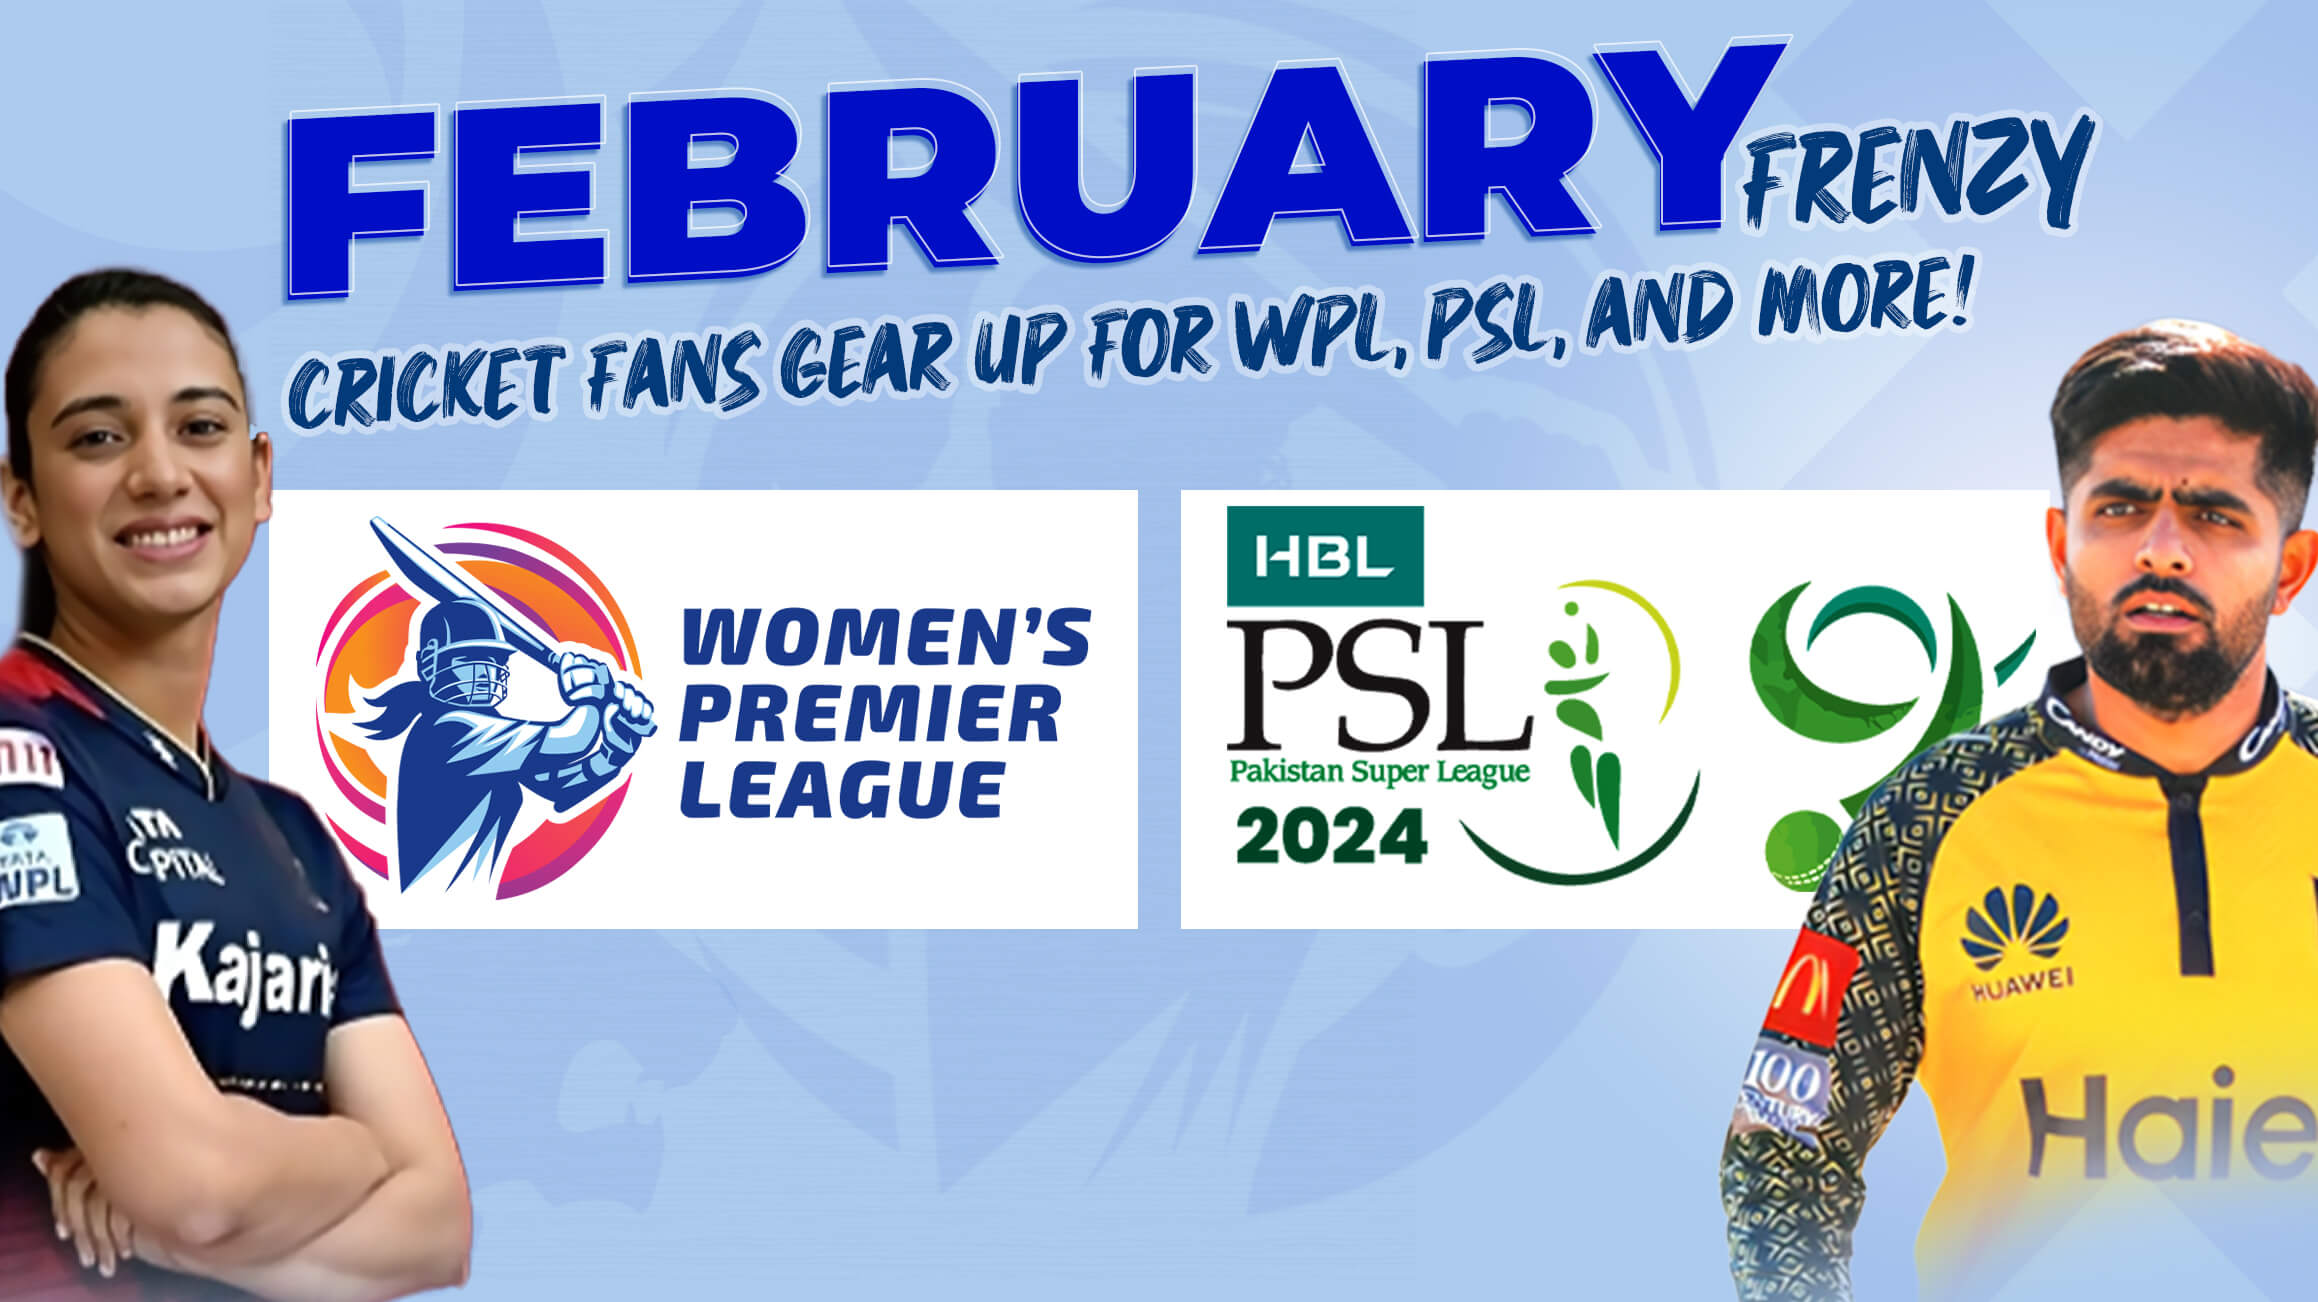 February Frenzy: Cricket Fans Gear Up for WPL, PSL, and More!